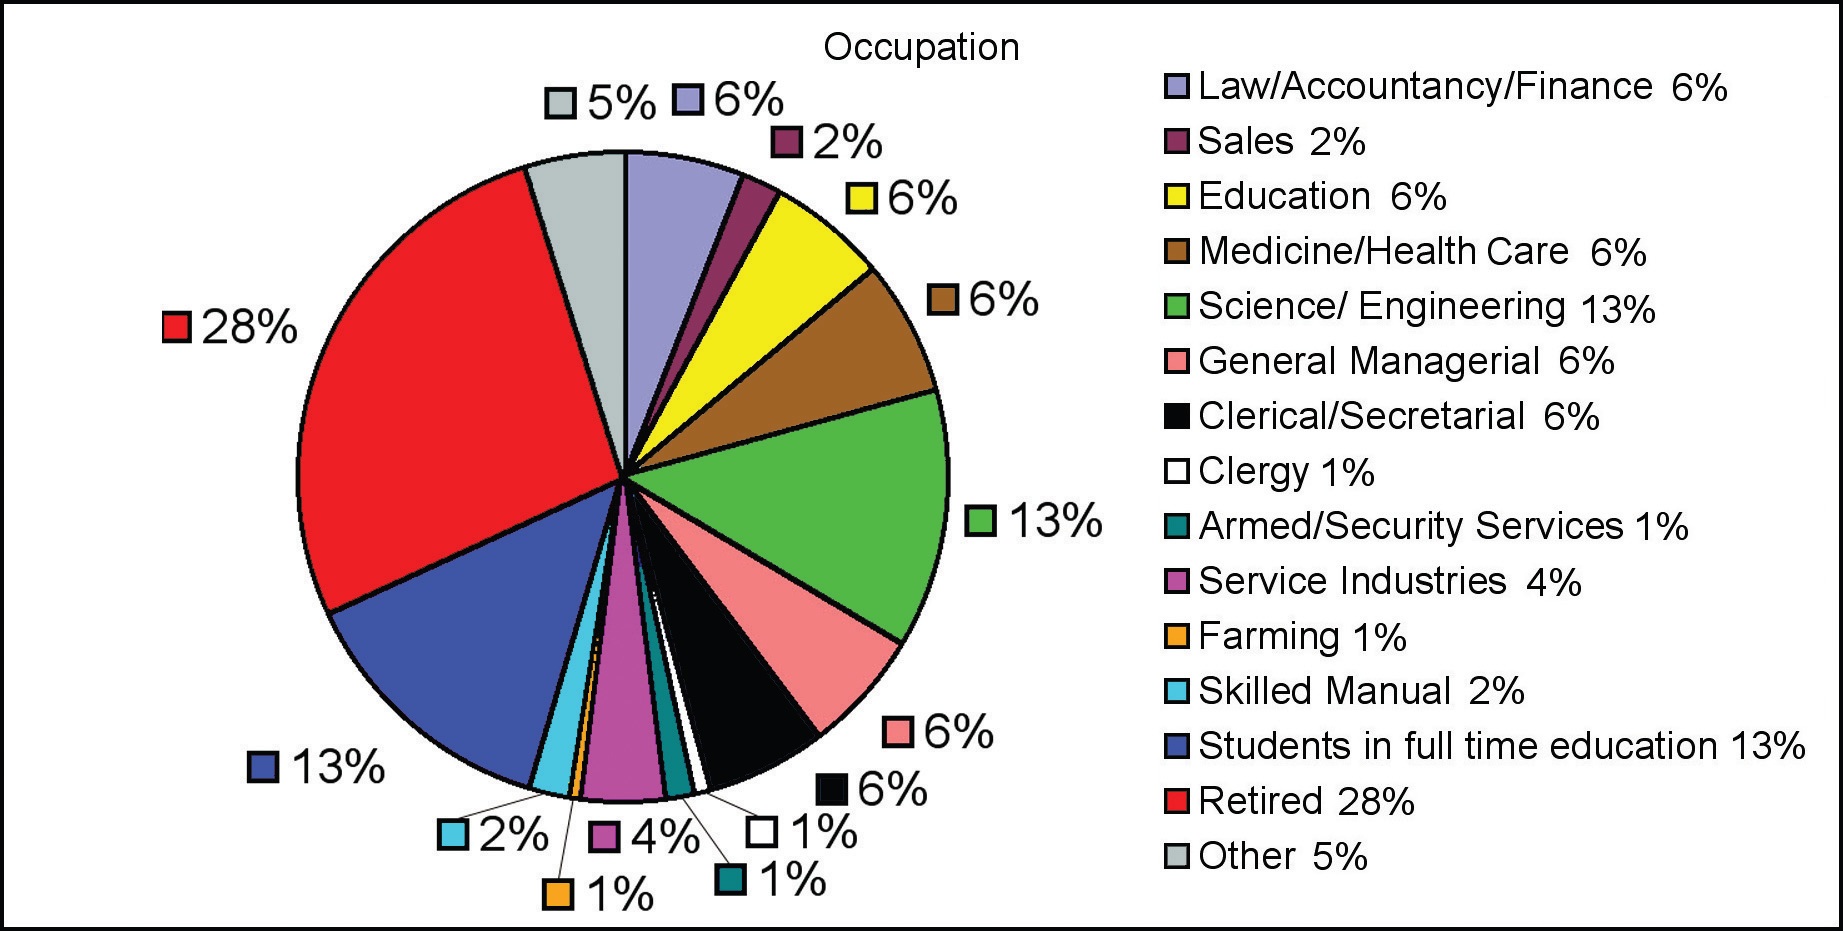 Occupations pie chart